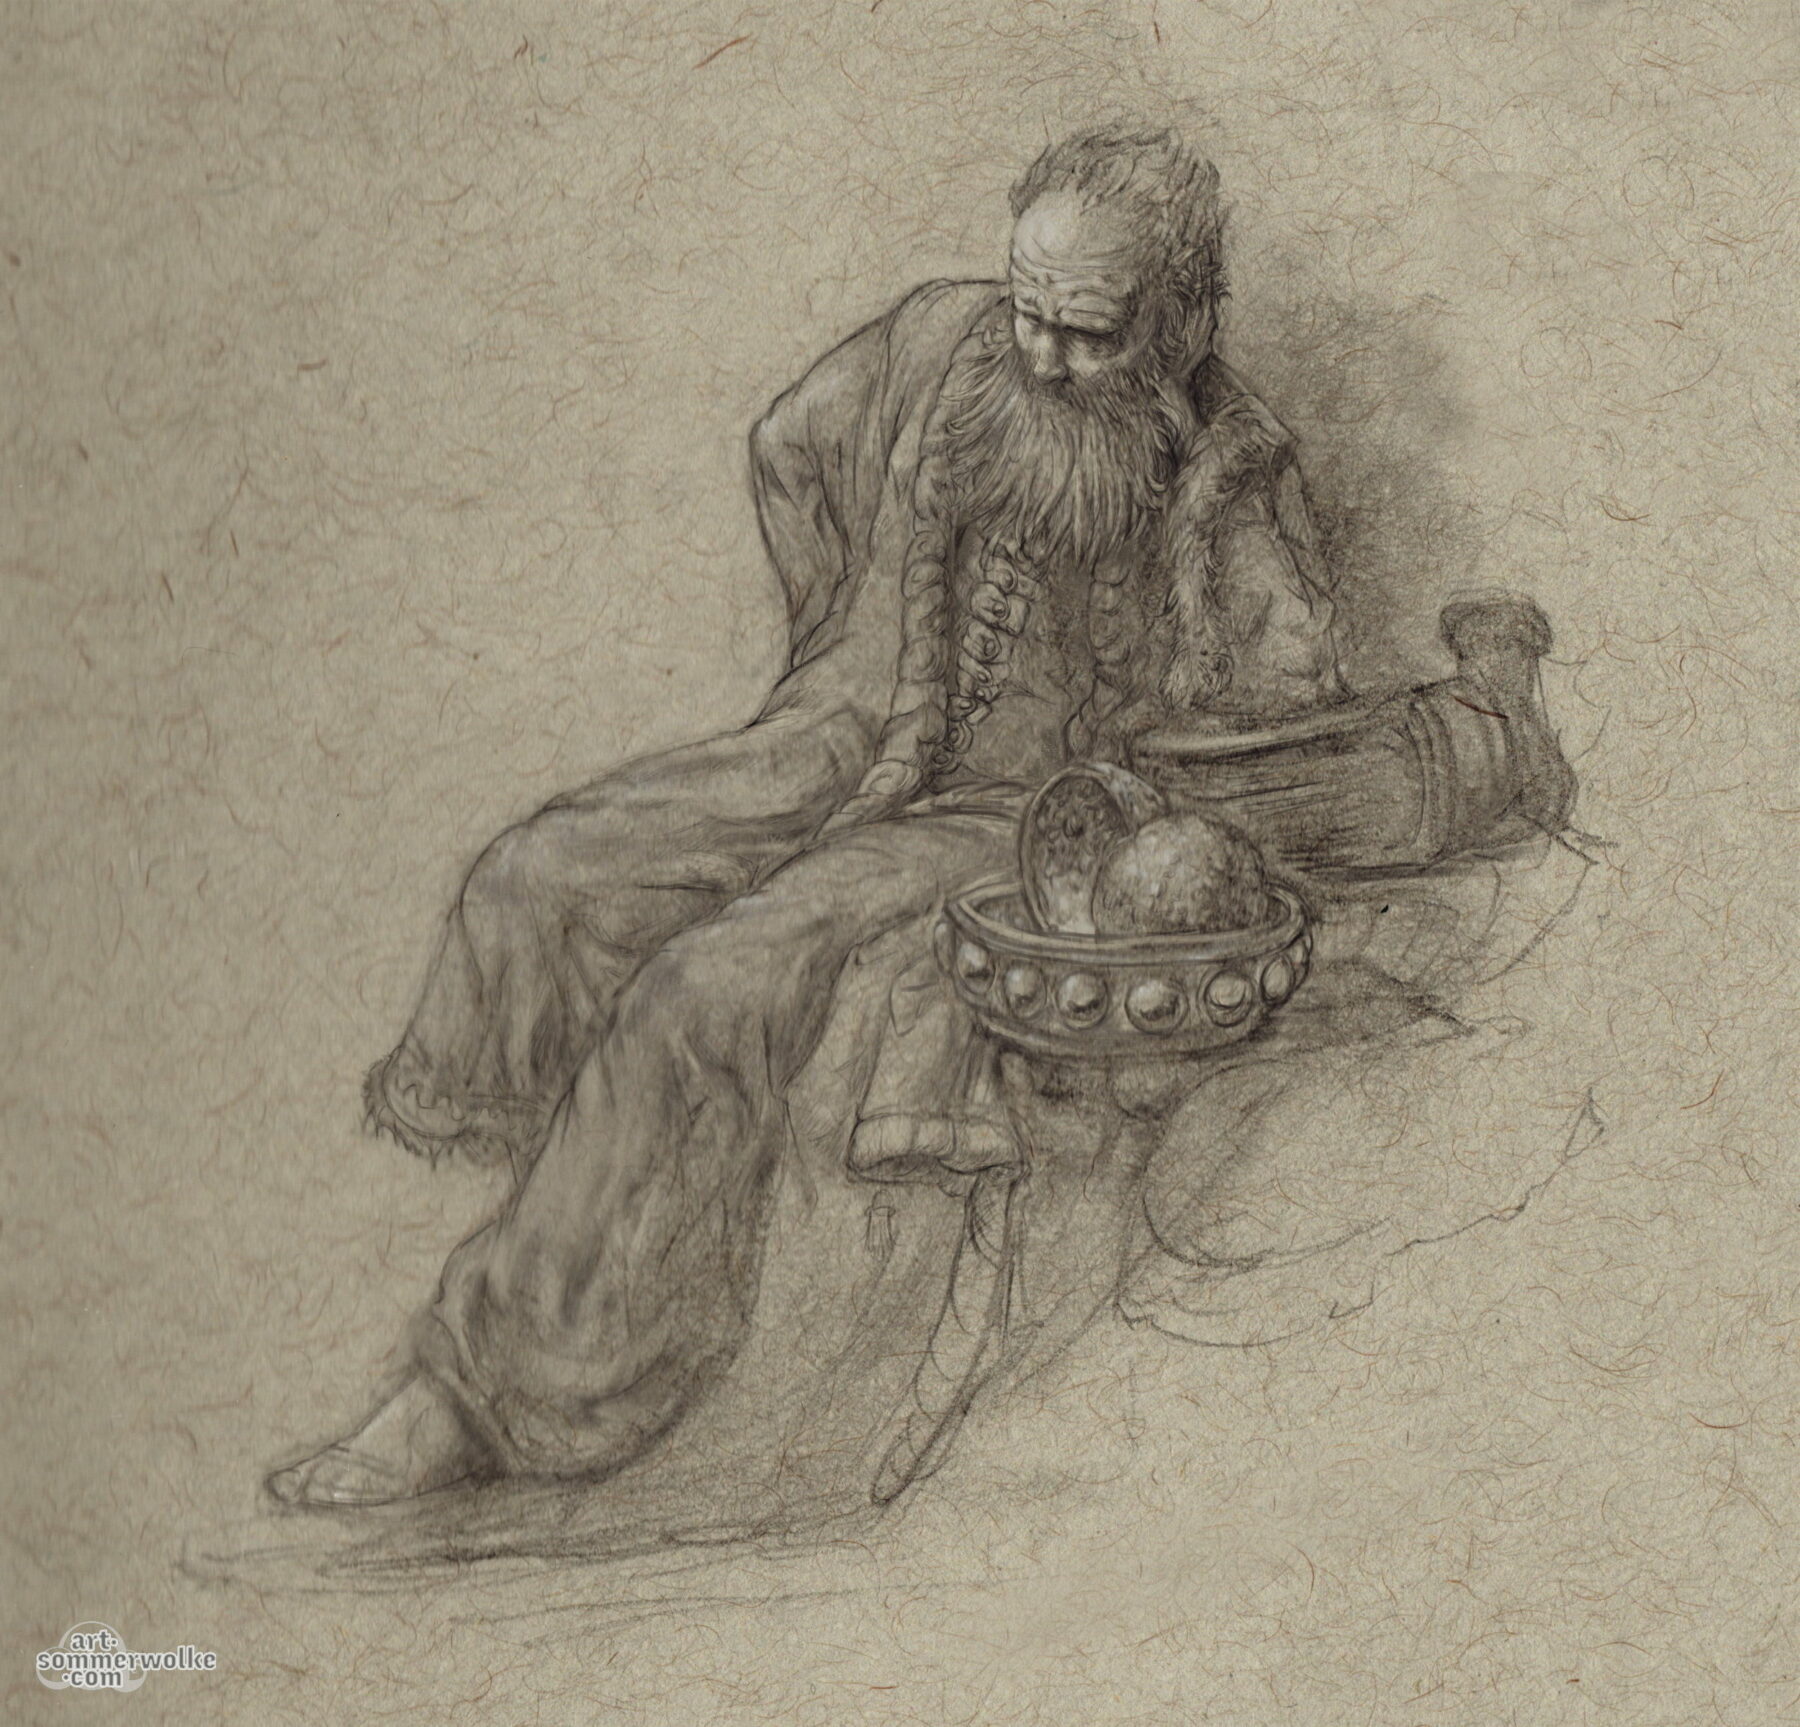 Digitale Nachzeichung des "Jeremia" von Rembrandt. Digital drawing of the "Jeremiah" from Rembrandt.